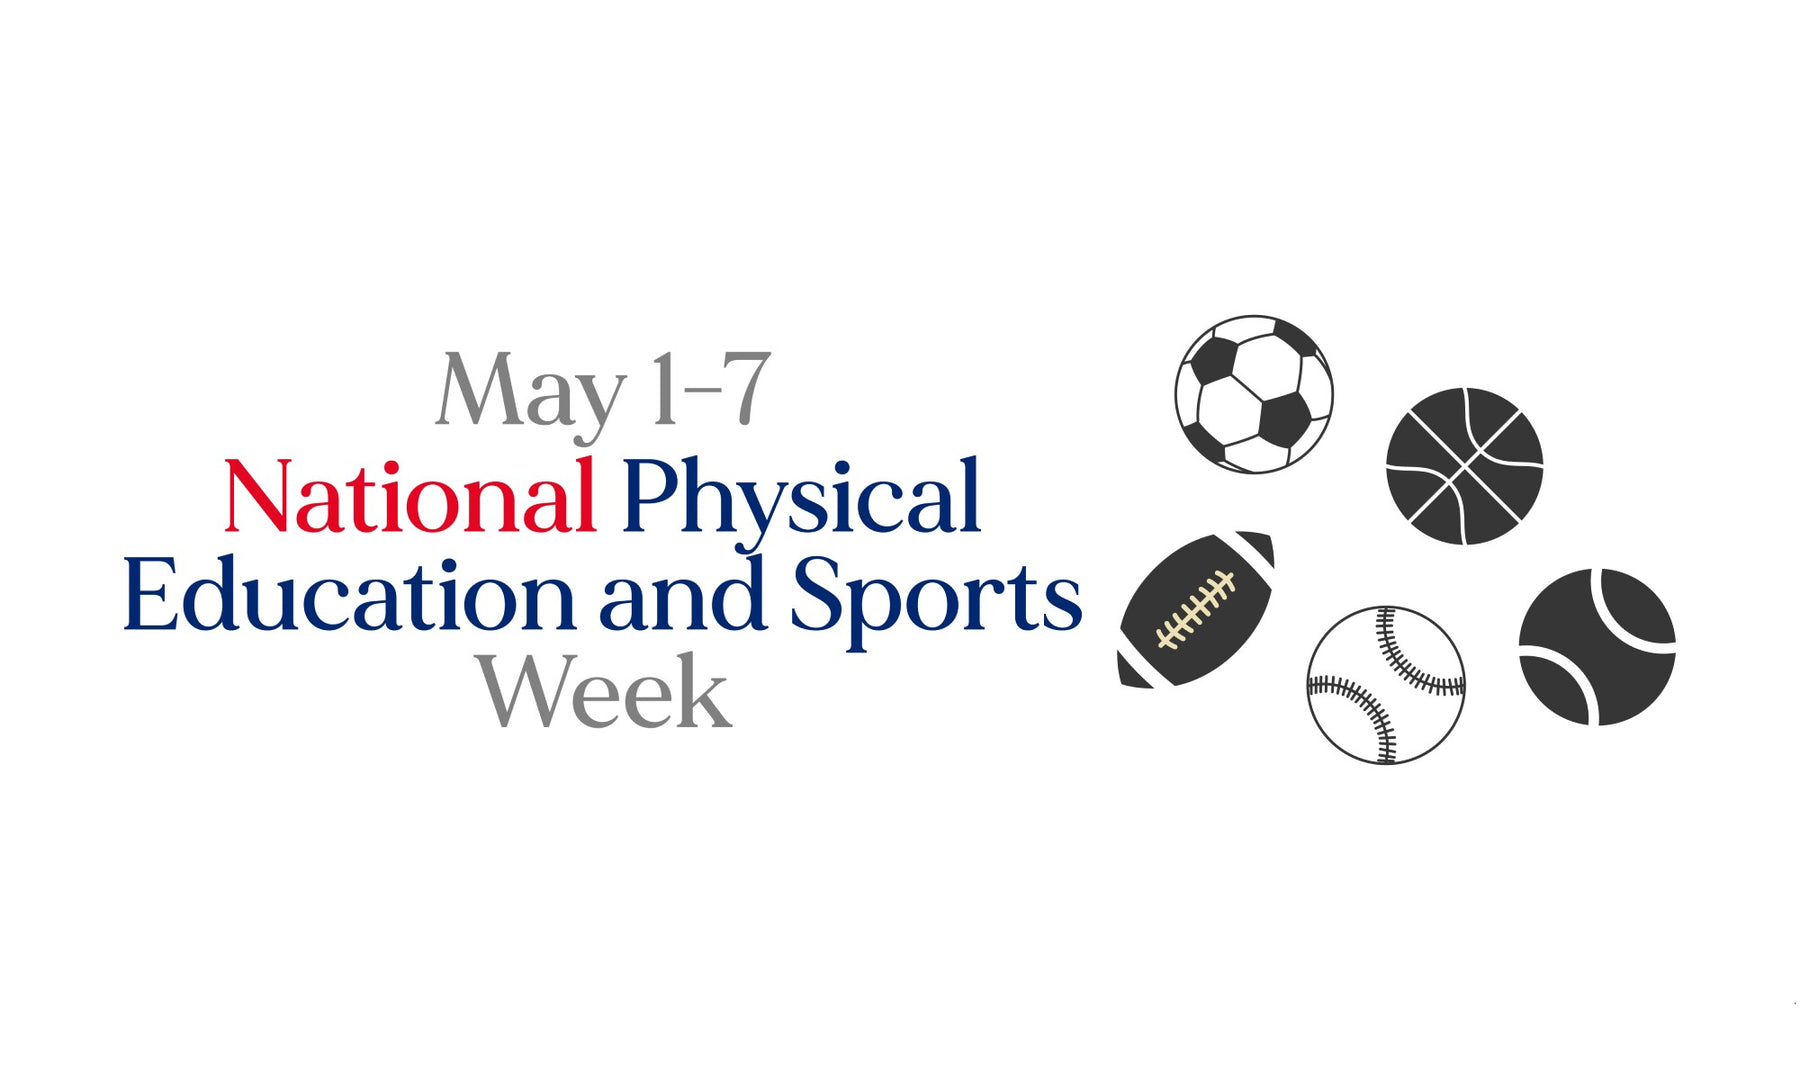 National Physical Education and Sports Week: 5 Ways to Stay Active